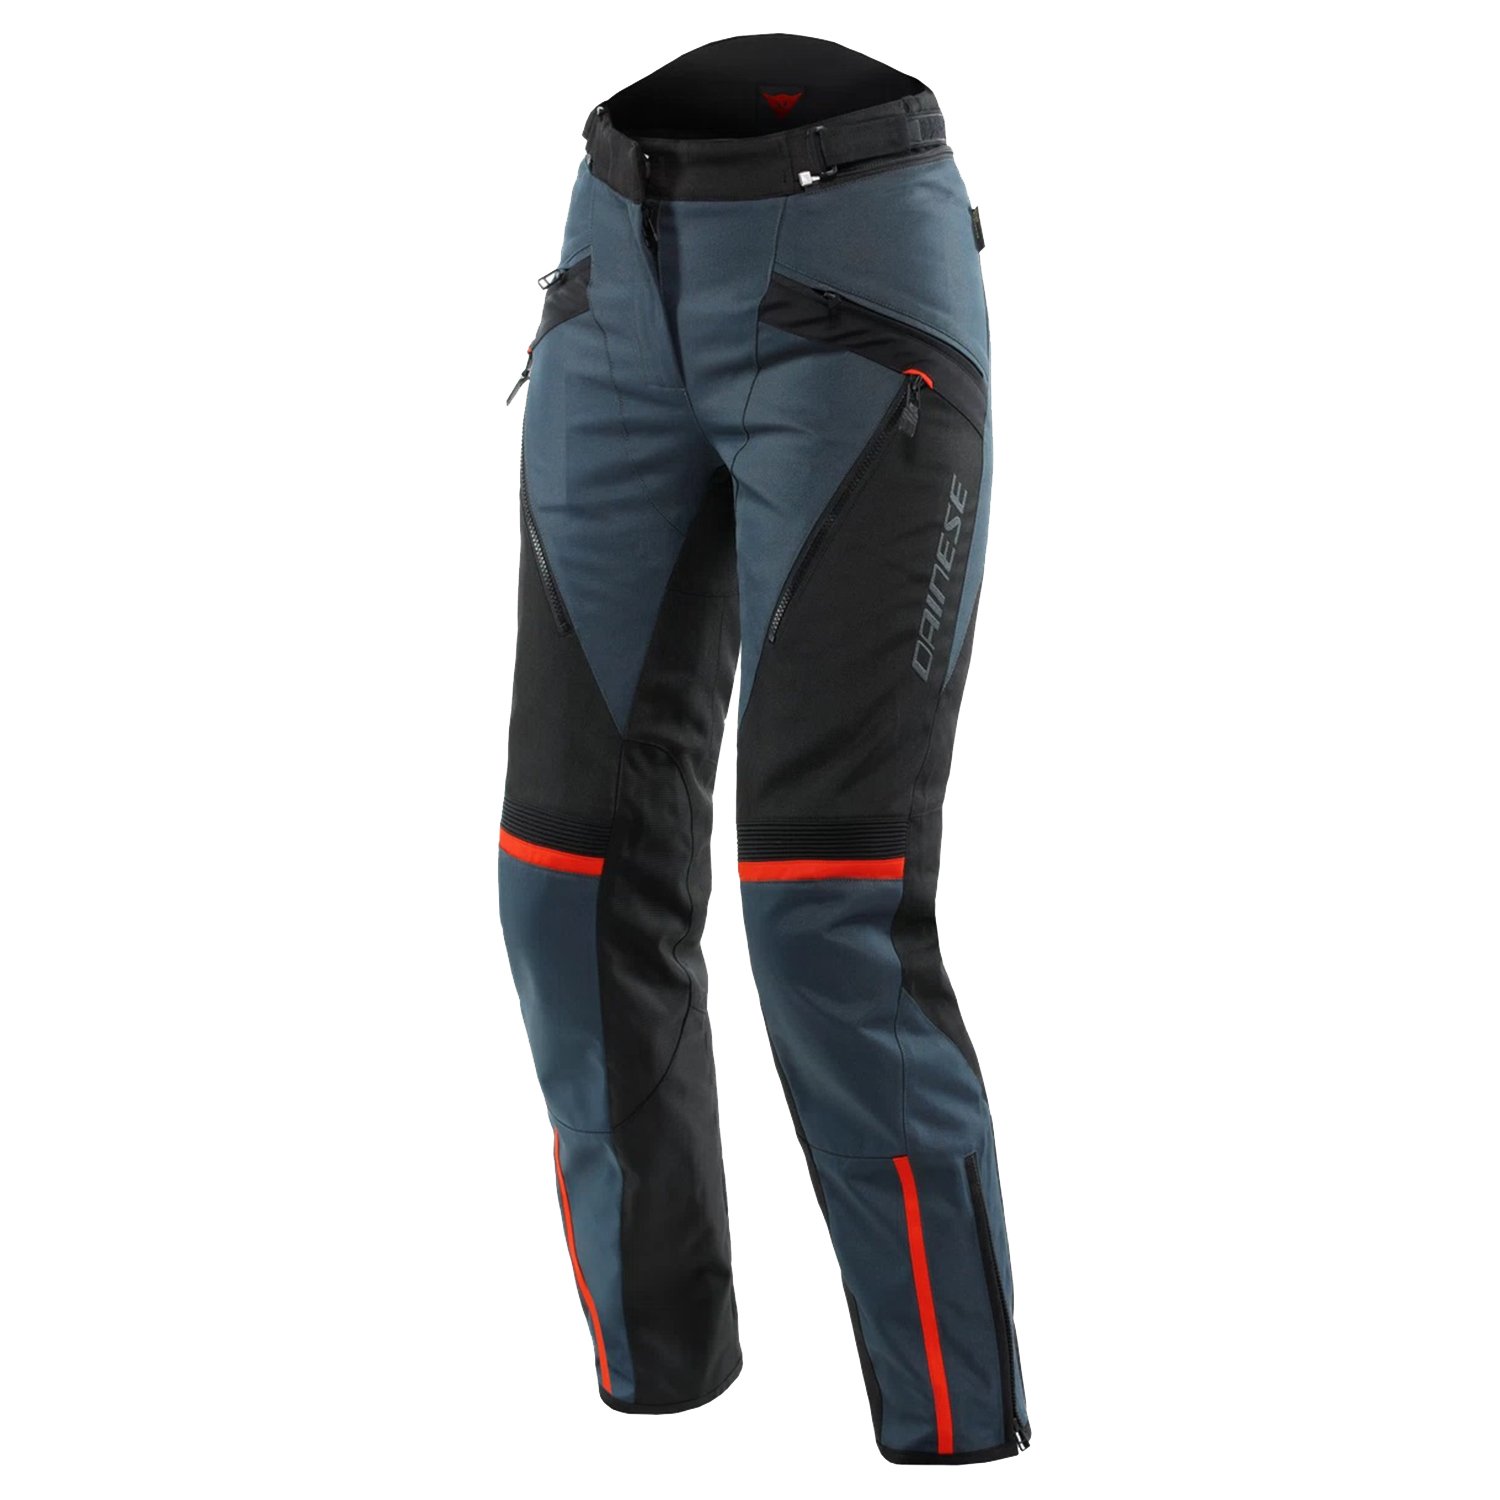 Image of Dainese Tempest 3 D-Dry Lady Pants Ebony Black Lava Red Taille 44